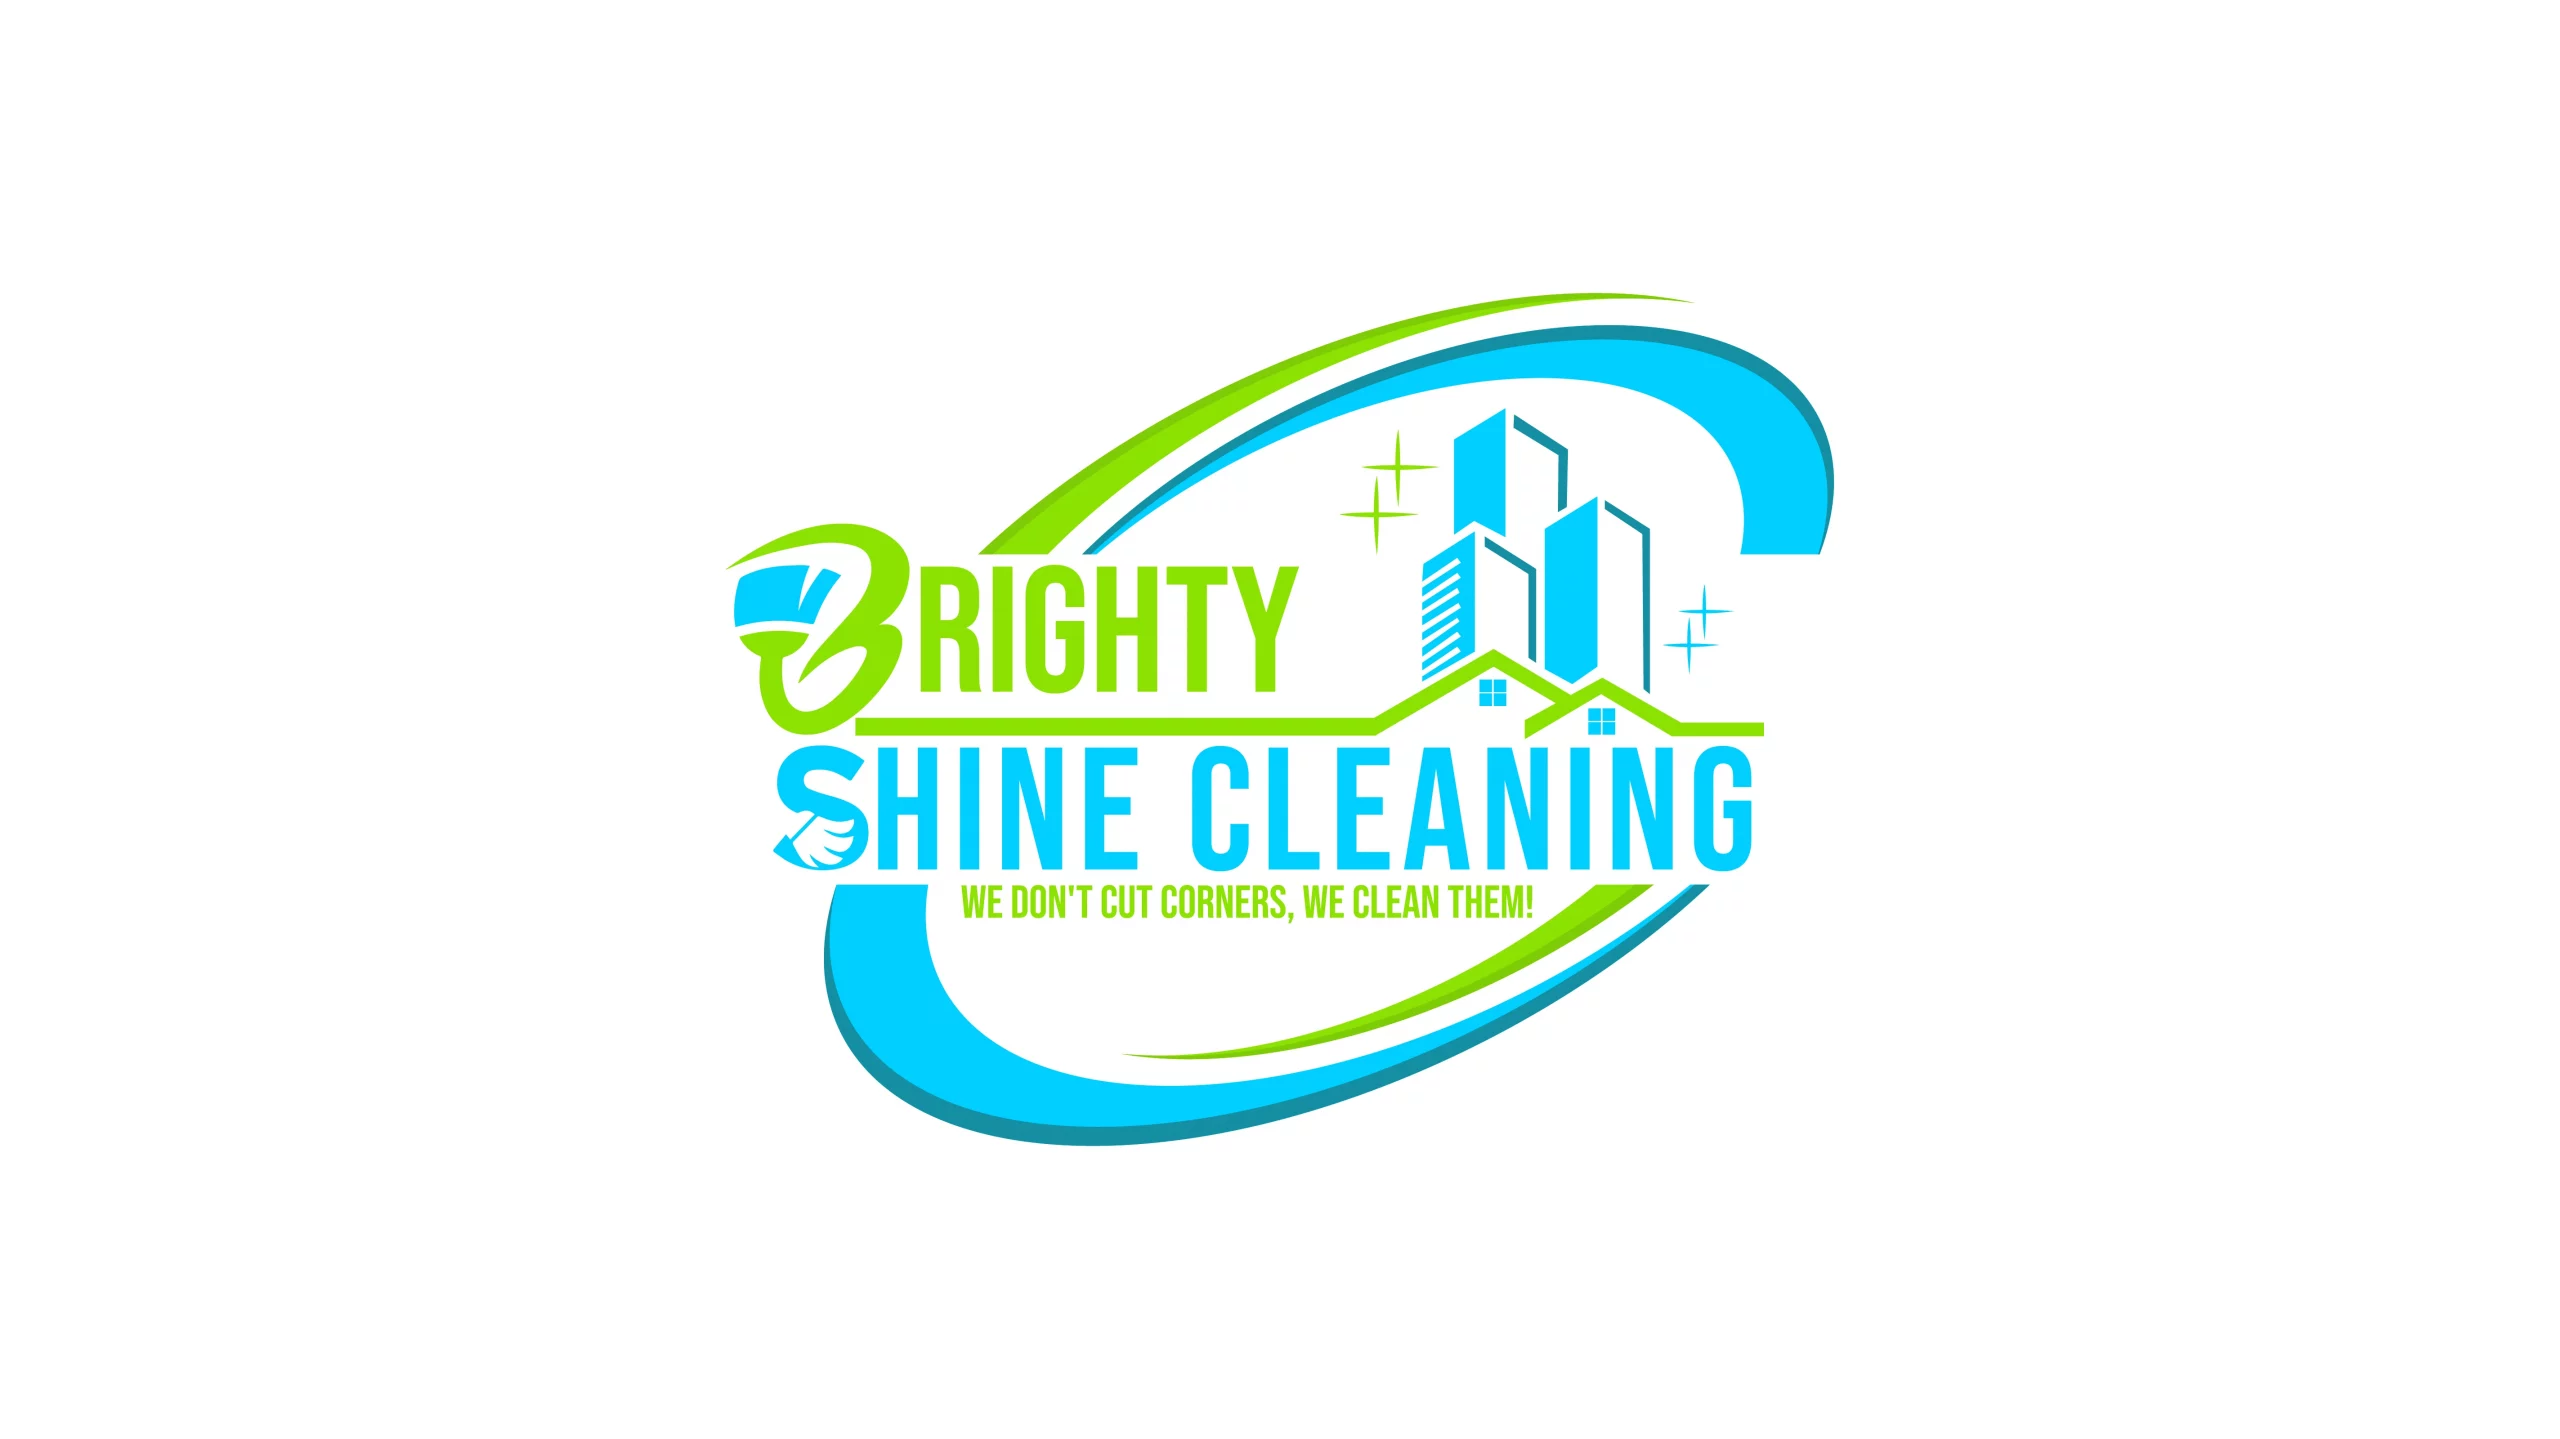 Brighty Shine Cleaning